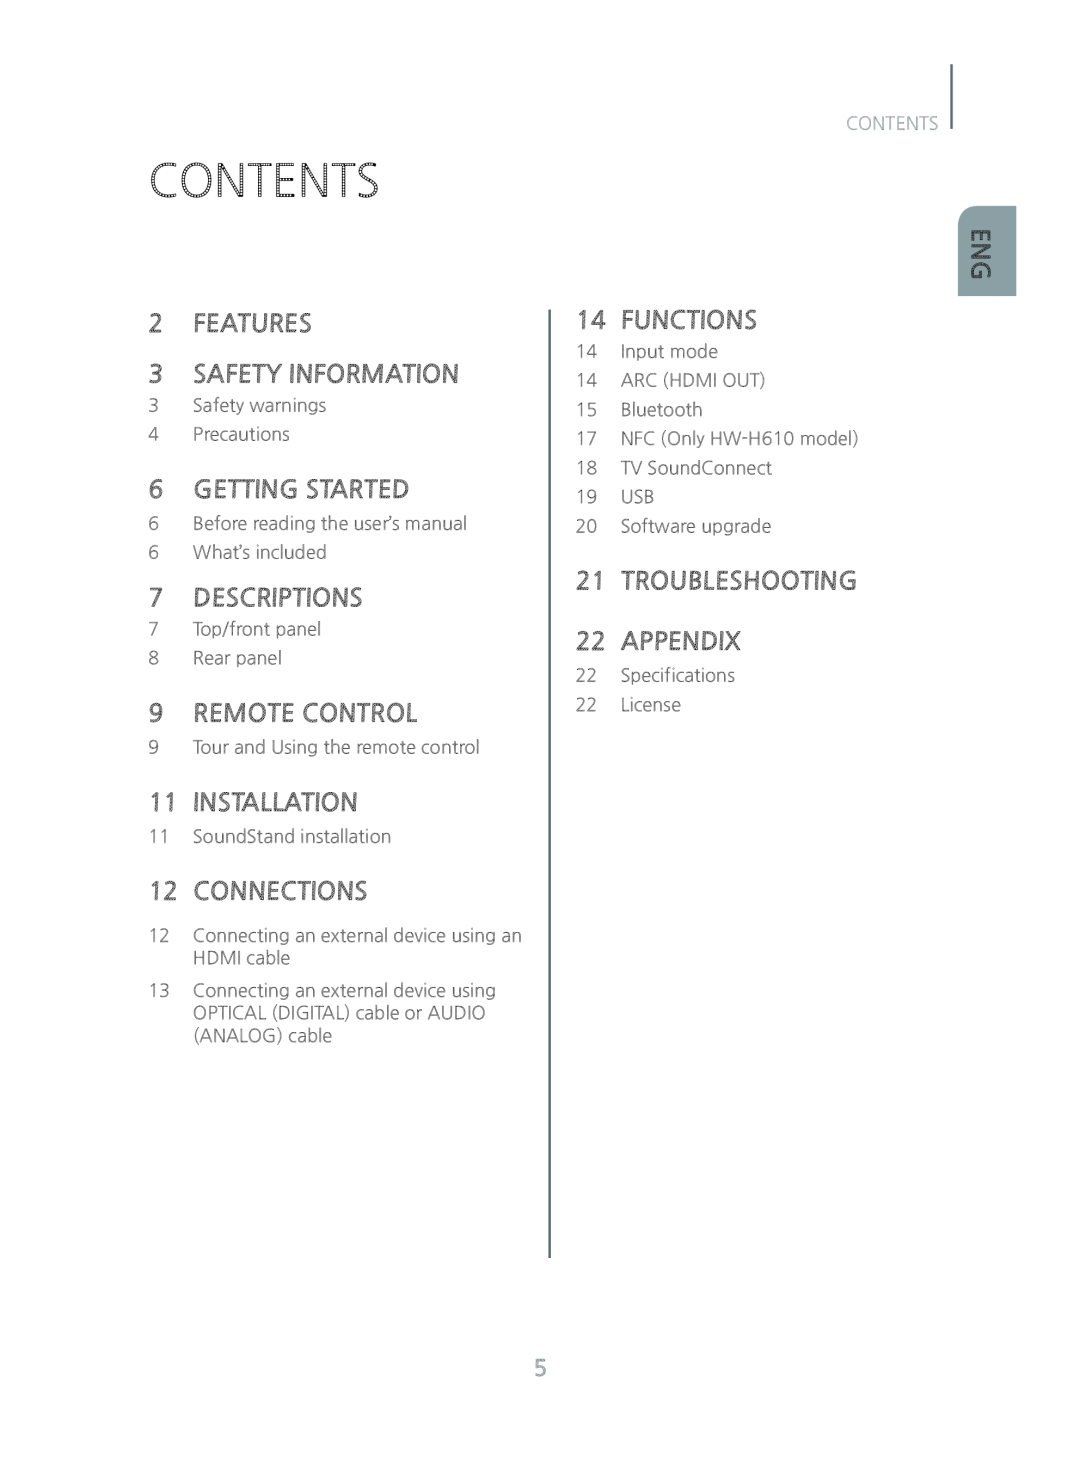 Samsung HW-H600/ZA Contents, 2FEATURES 3SAFETY INFORMATION, 6GETTING STARTED, 7DESCRIPTIONS, 9REMOTE CONTROL, Installation 